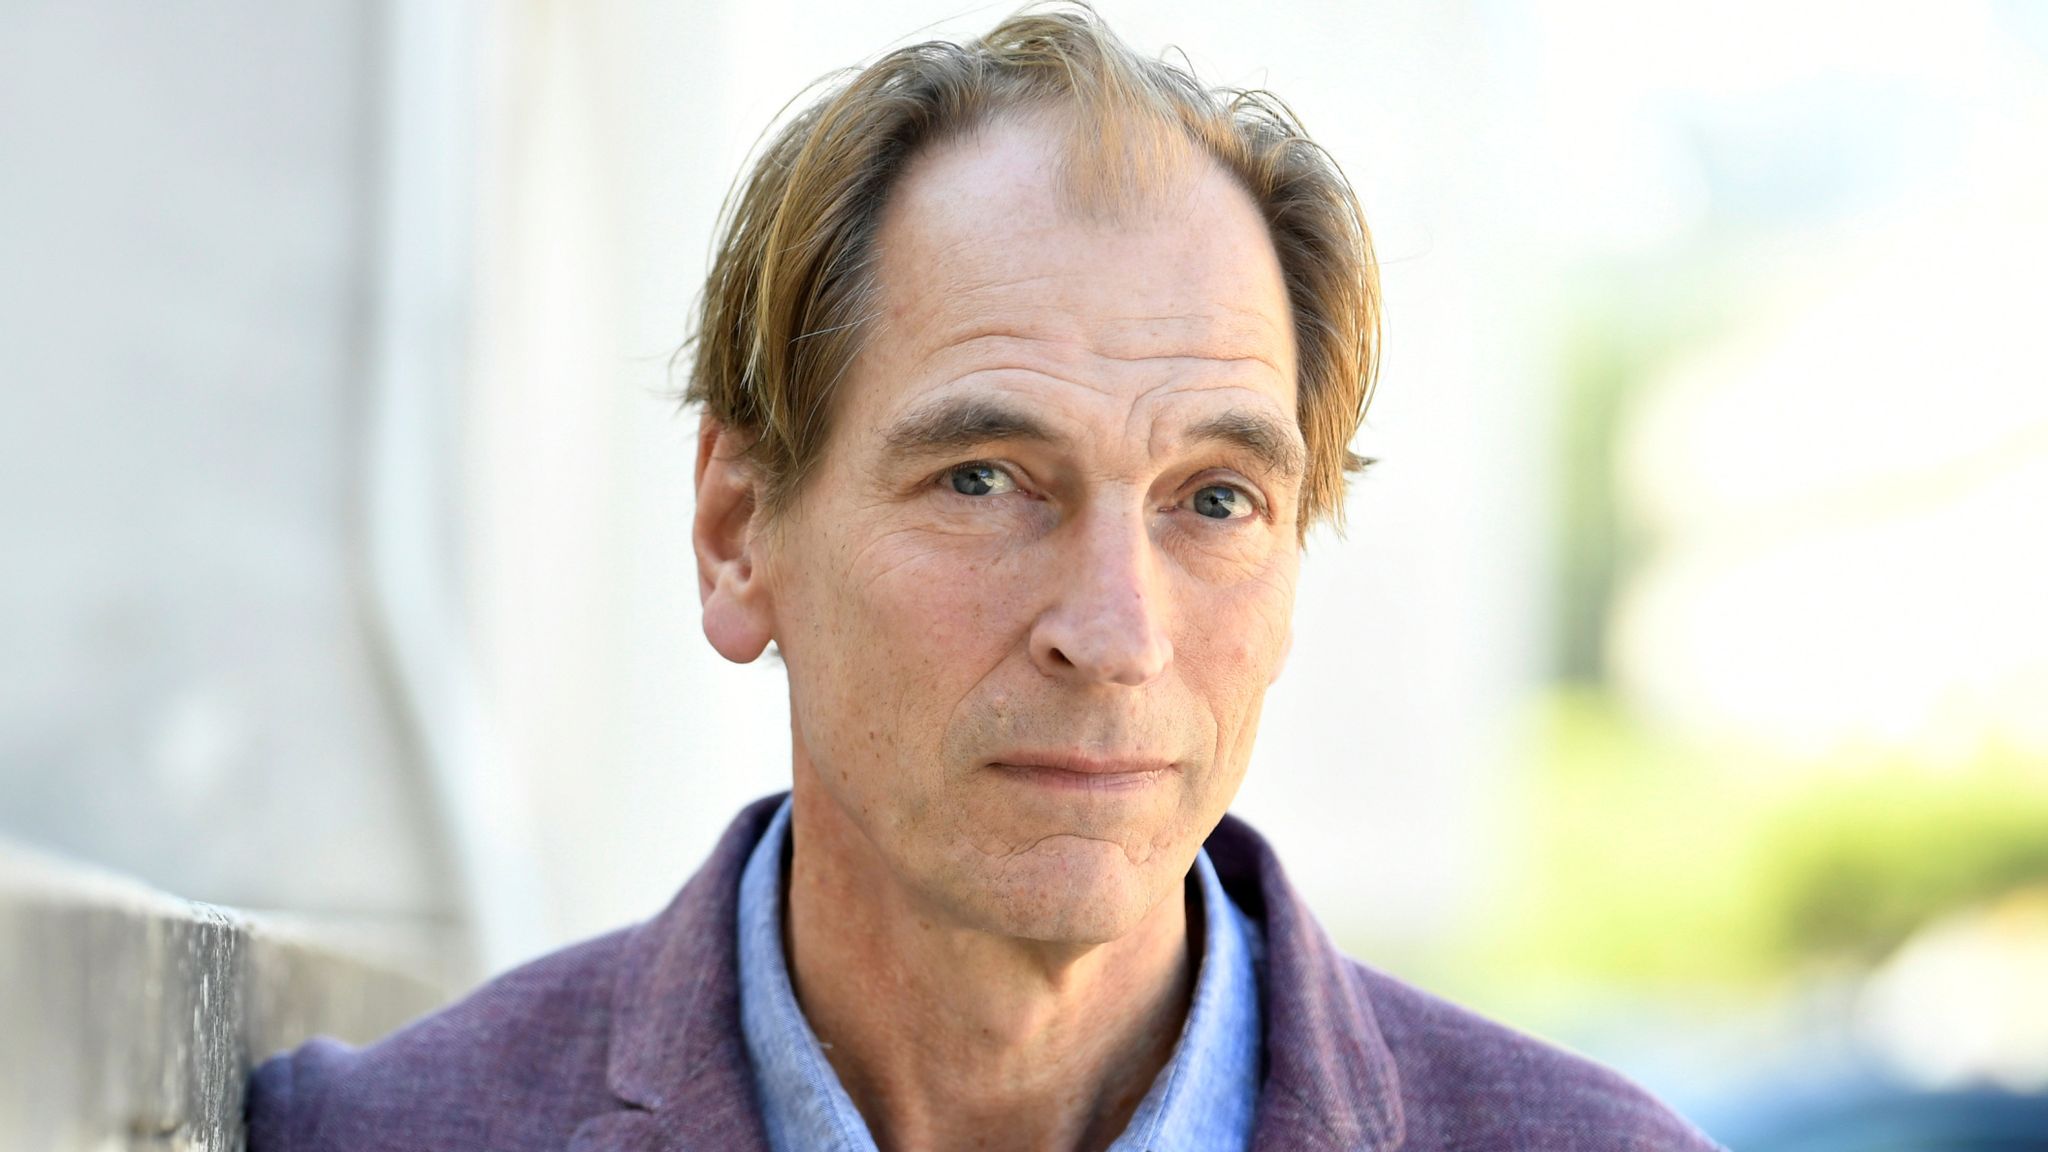 Latest On Missing Actor Julian Sands